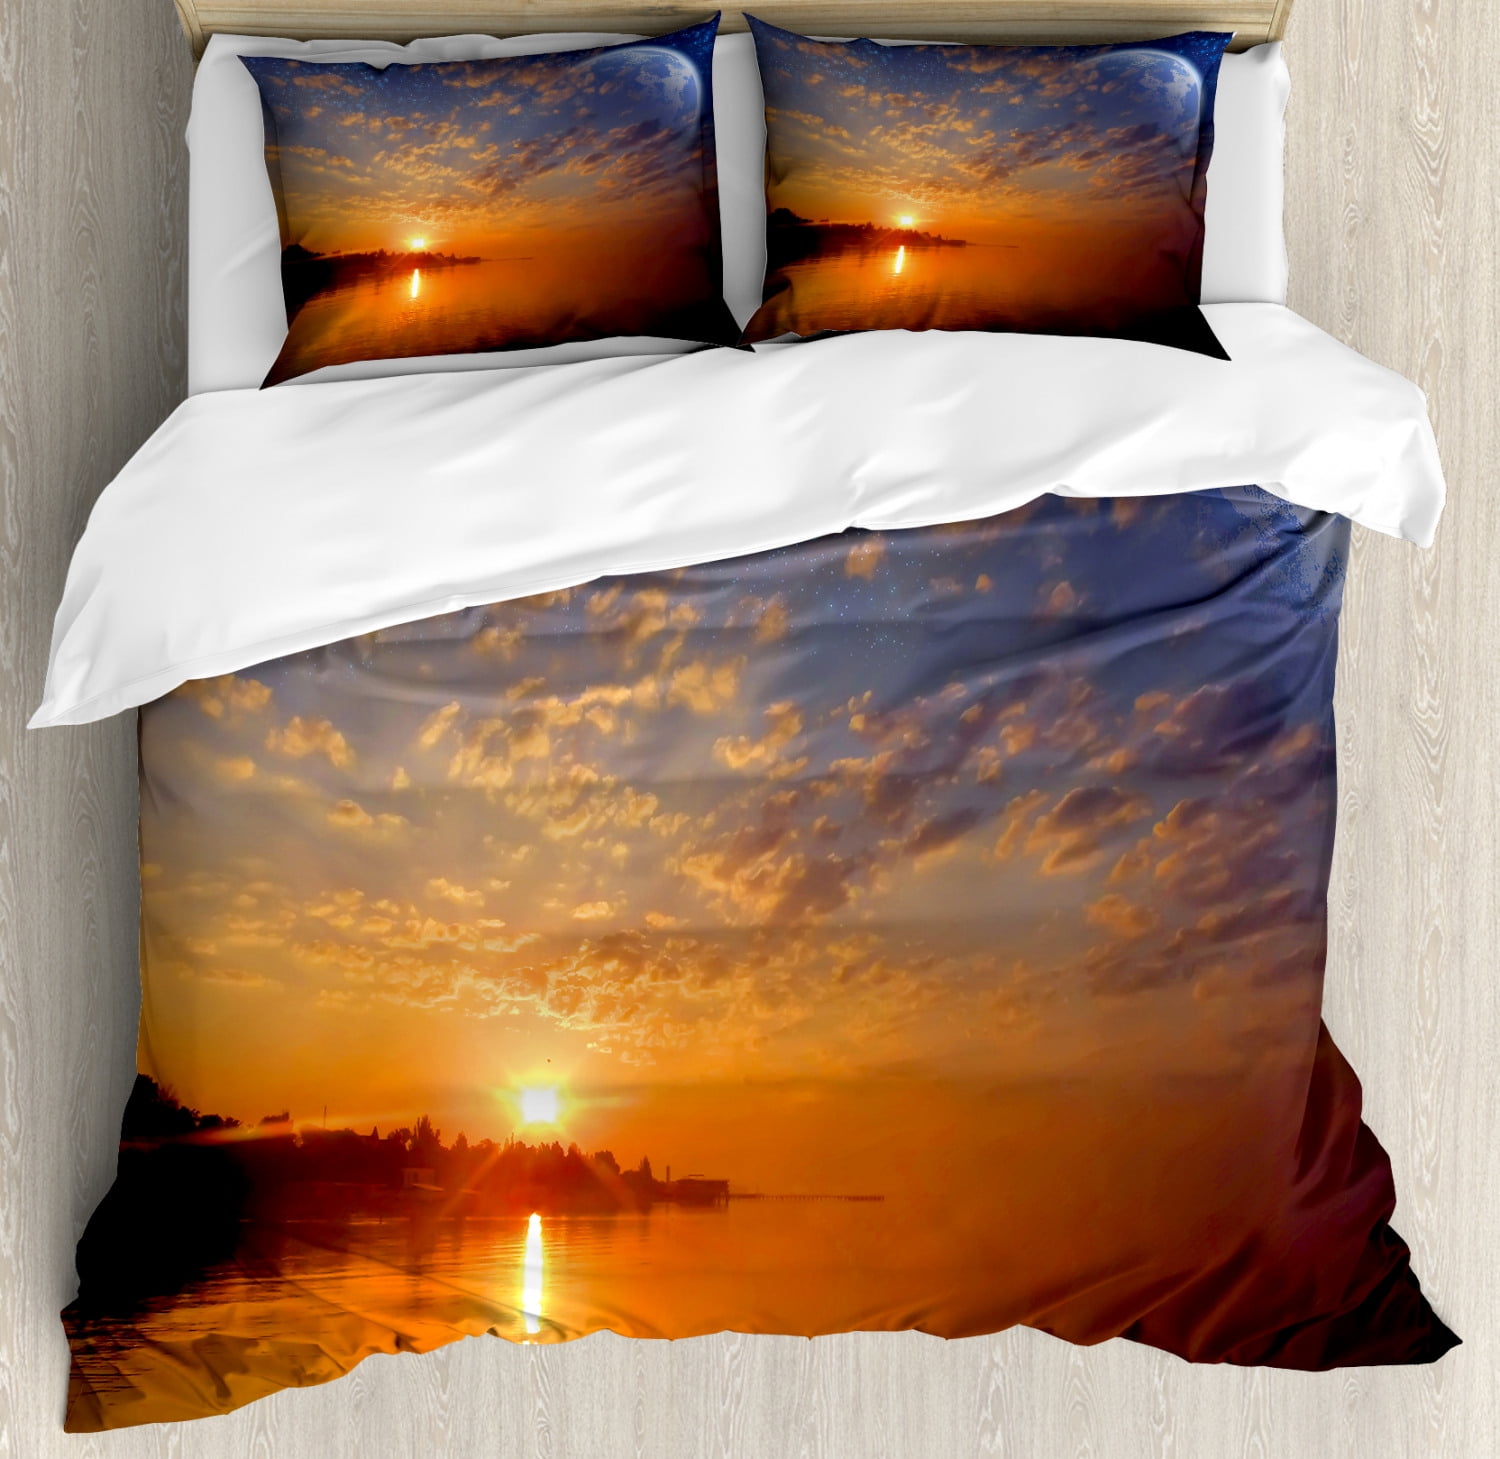 Space Decor Queen Size Duvet Cover Set Exquisite Skyline With